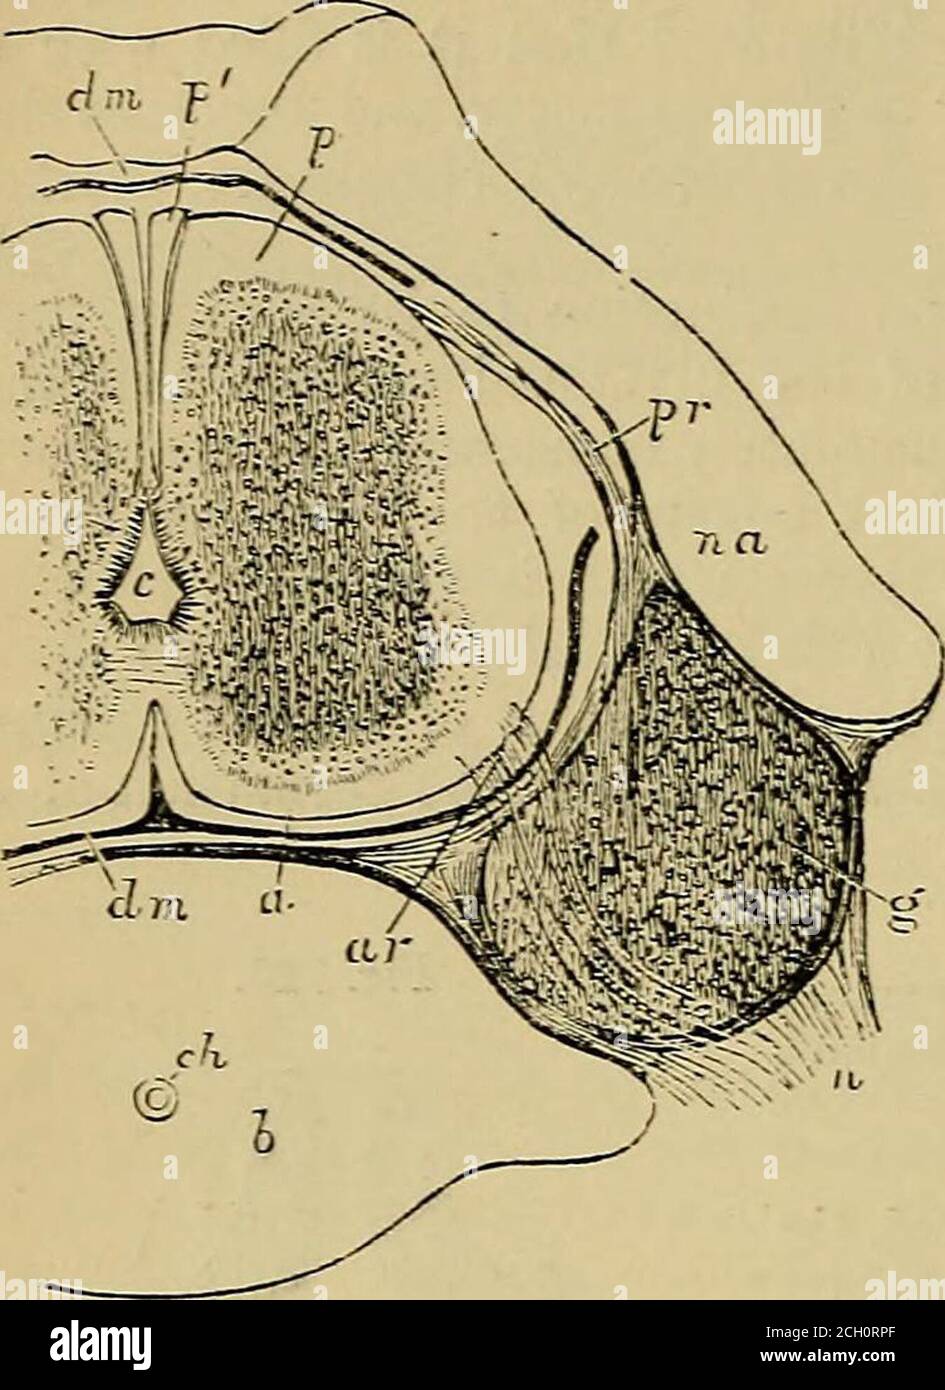 . Quain's elements of anatomy . y, and somewhat later theanterior white commissure. Fis. 724. Fig. 724.—Transvekse section of half THE CAllTILAGINOrs VERTEBRAL COLCMJrAND THE SPINAL COF.D IN THE CERVICALPART OF A HUjIAN EMBRYO OP FROII NINE TO TEN WEEKS. (Frcm Kolliker.) ^ c, central canal lined viith eijitlielium ;a, anterior columu ; ^;, XDOsterior column ;j&gt;, band of Goll ; g, ganglion of theposterior root ; 2^  posterior root; a r,anterior root passing over the ganglion;d ill, dura-matral sheath, omitted nearer,to show the posterior roots; b, body ofthe vertebra ; c h, chorda dorsalis; Stock Photo